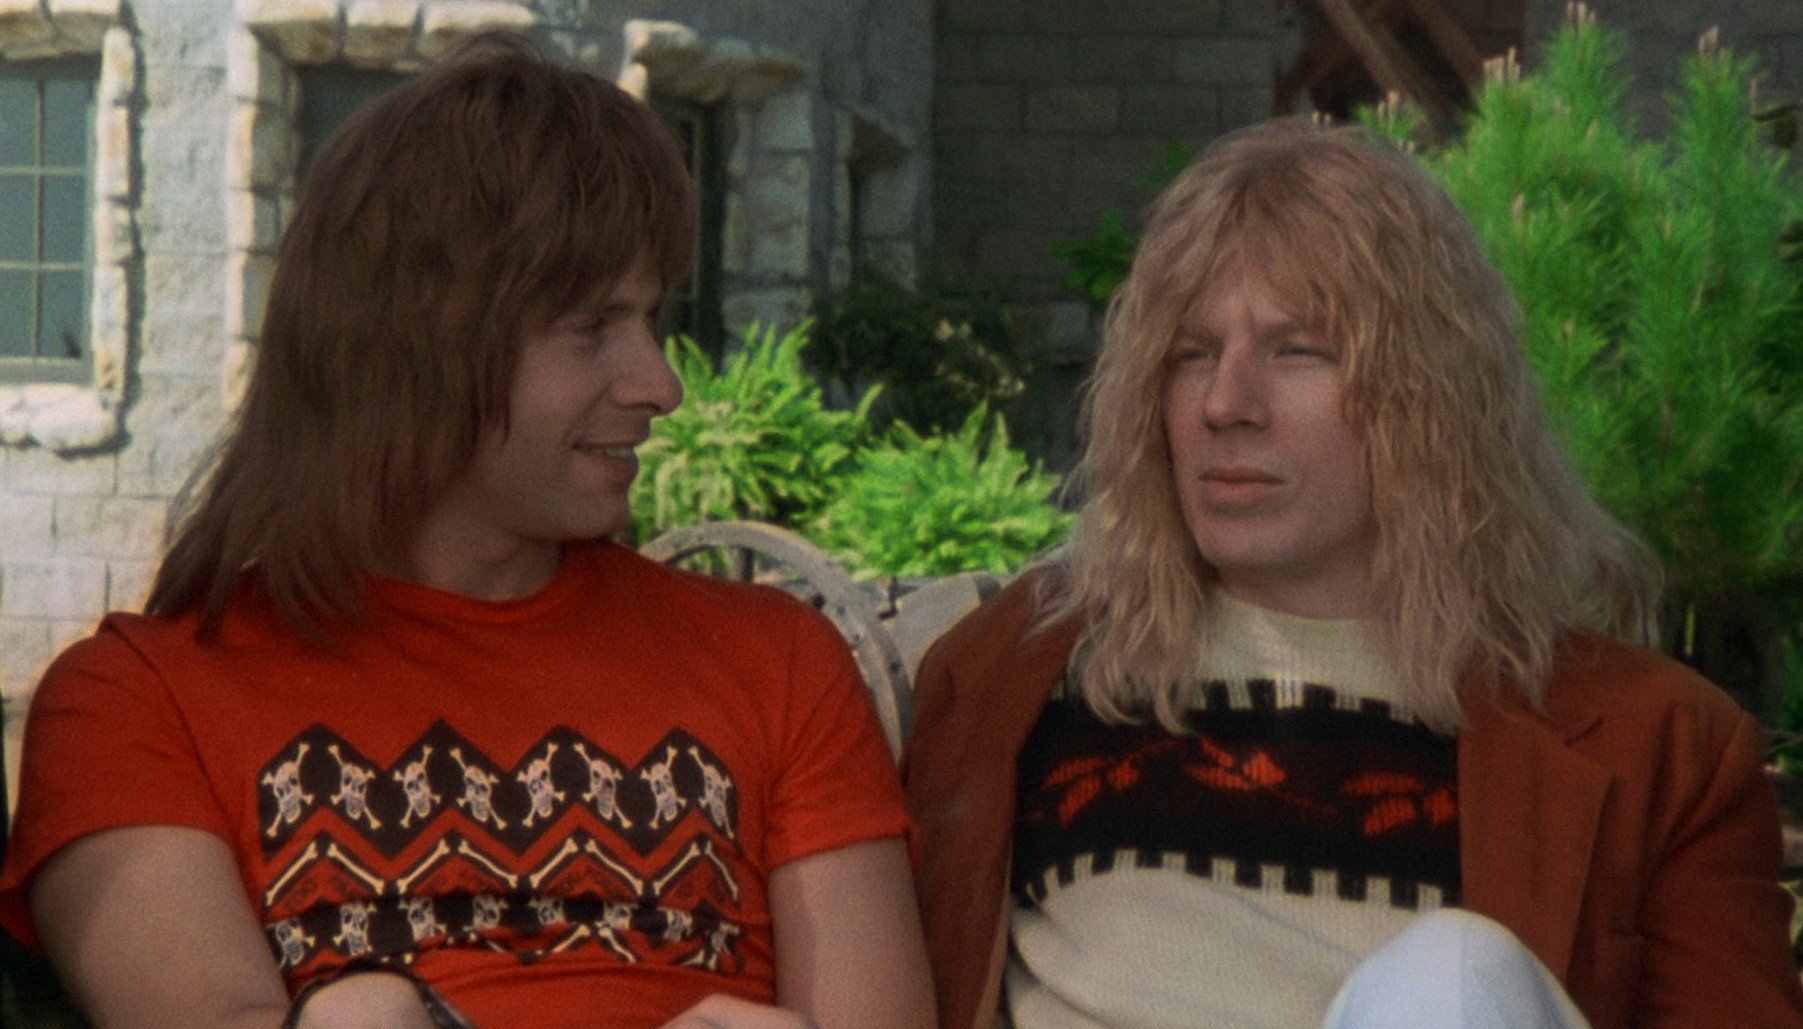 'This Is Spinal Tap' turns 30